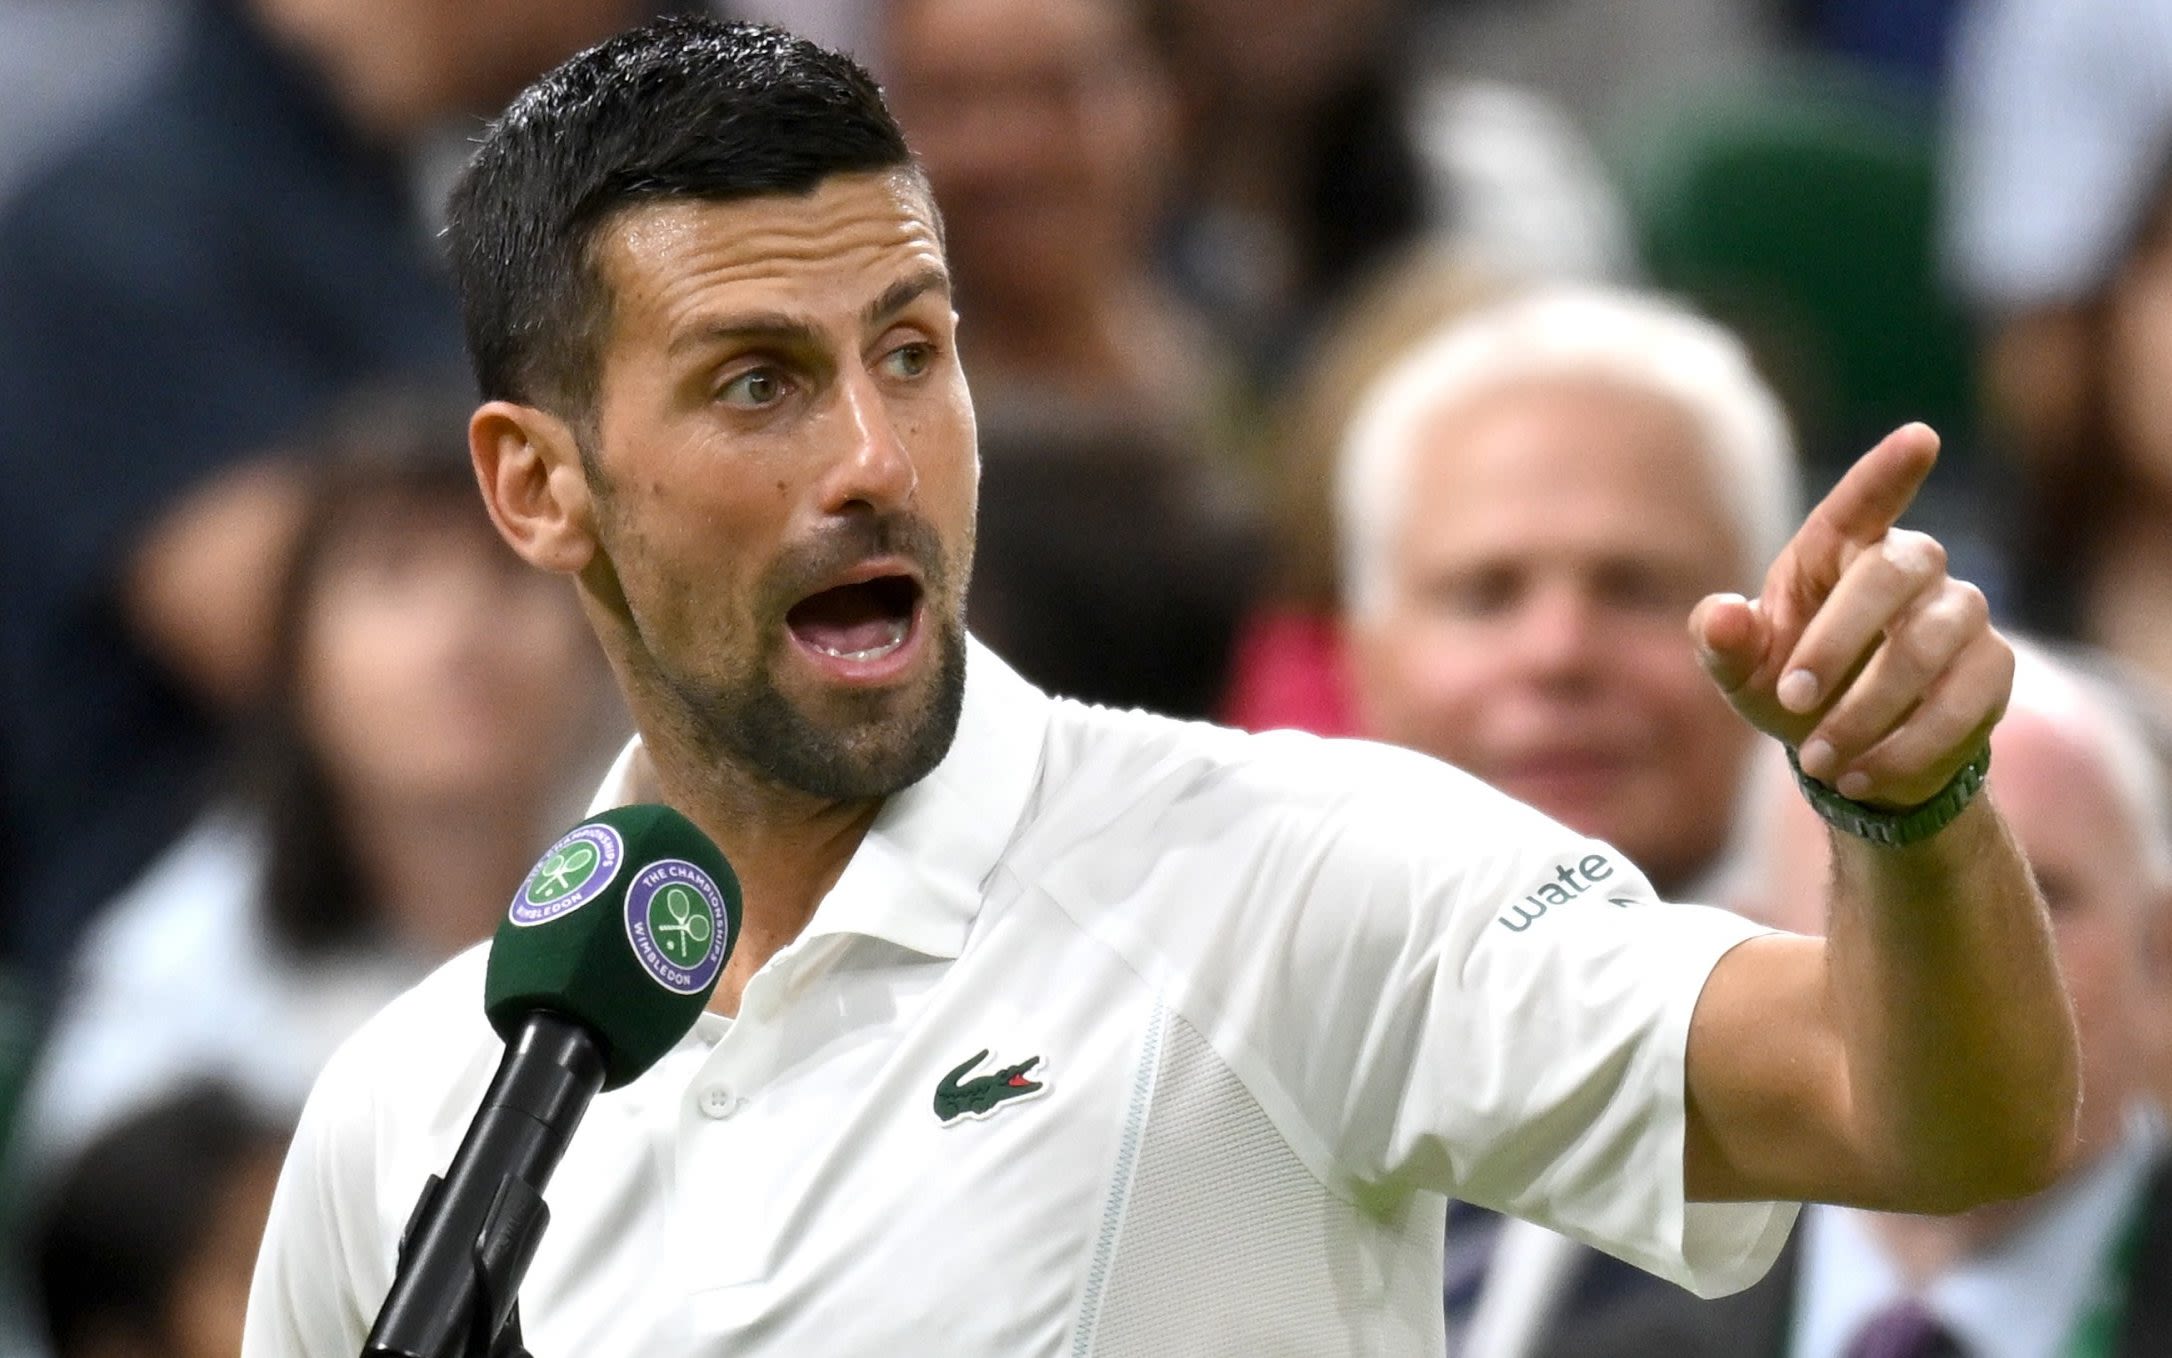 Novak Djokovic blasts ‘disrespect’ from Wimbledon crowd saying ‘you guys can’t touch me’